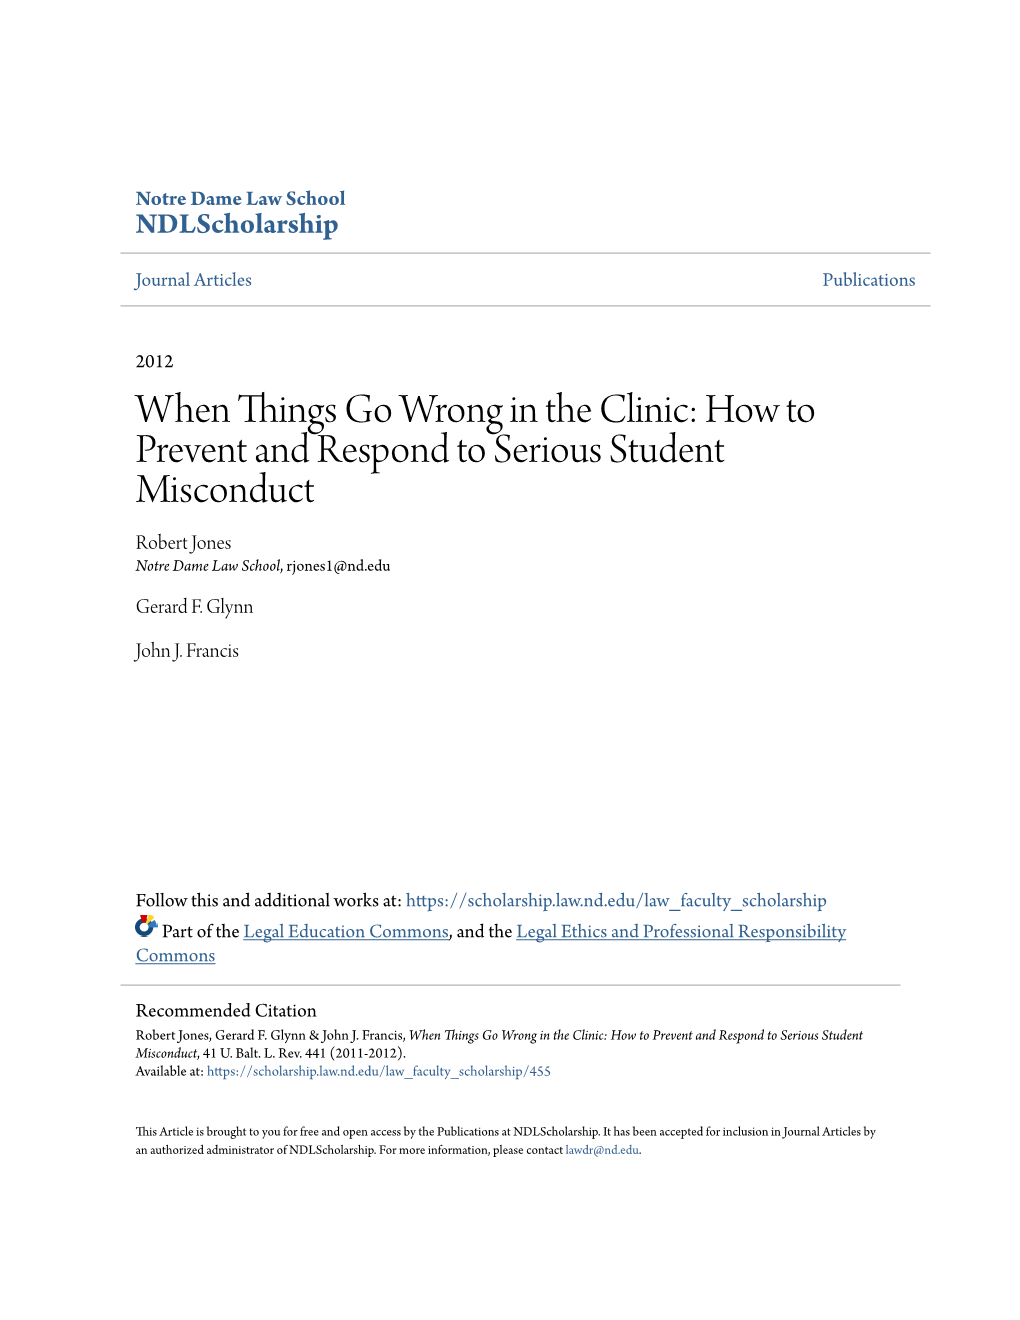 When Things Go Wrong in the Clinic: How to Prevent and Respond to Serious Student Misconduct Robert Jones Notre Dame Law School, Rjones1@Nd.Edu